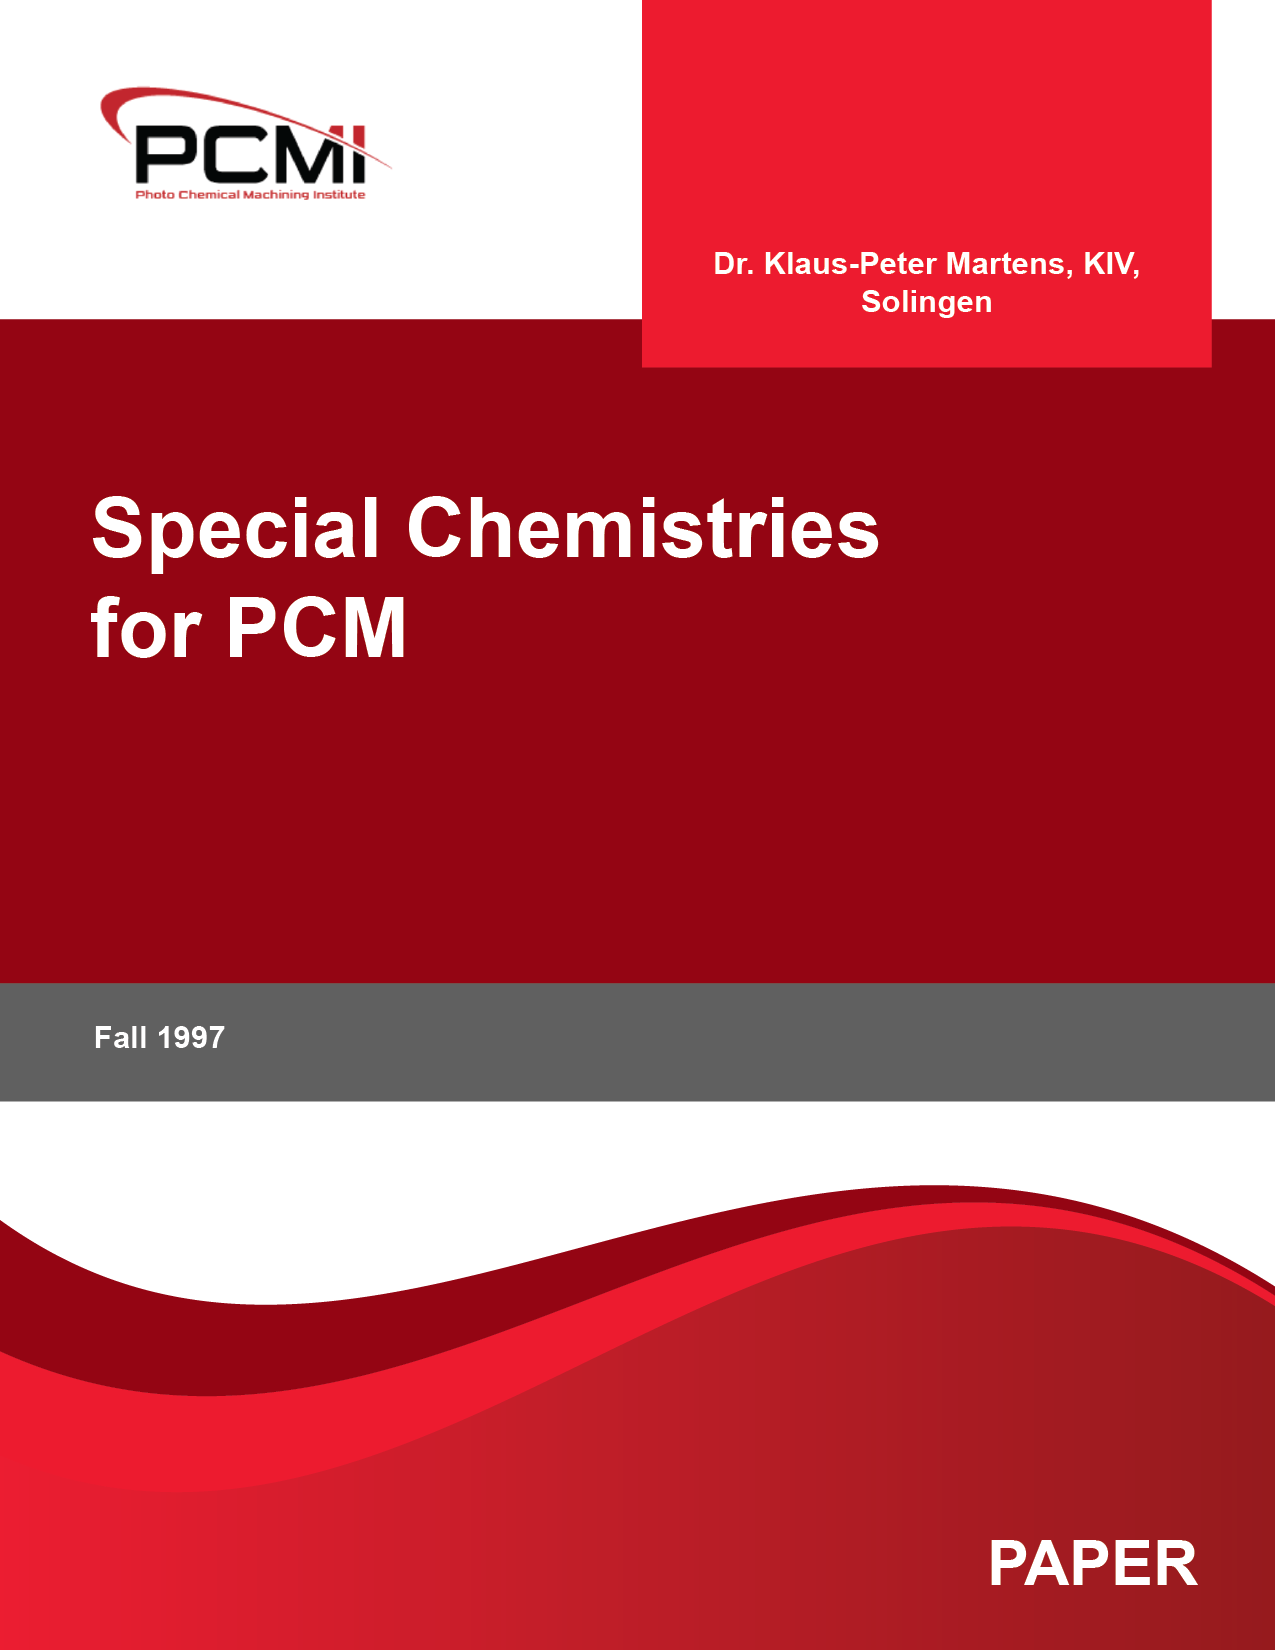 Special Chemistries for PCM